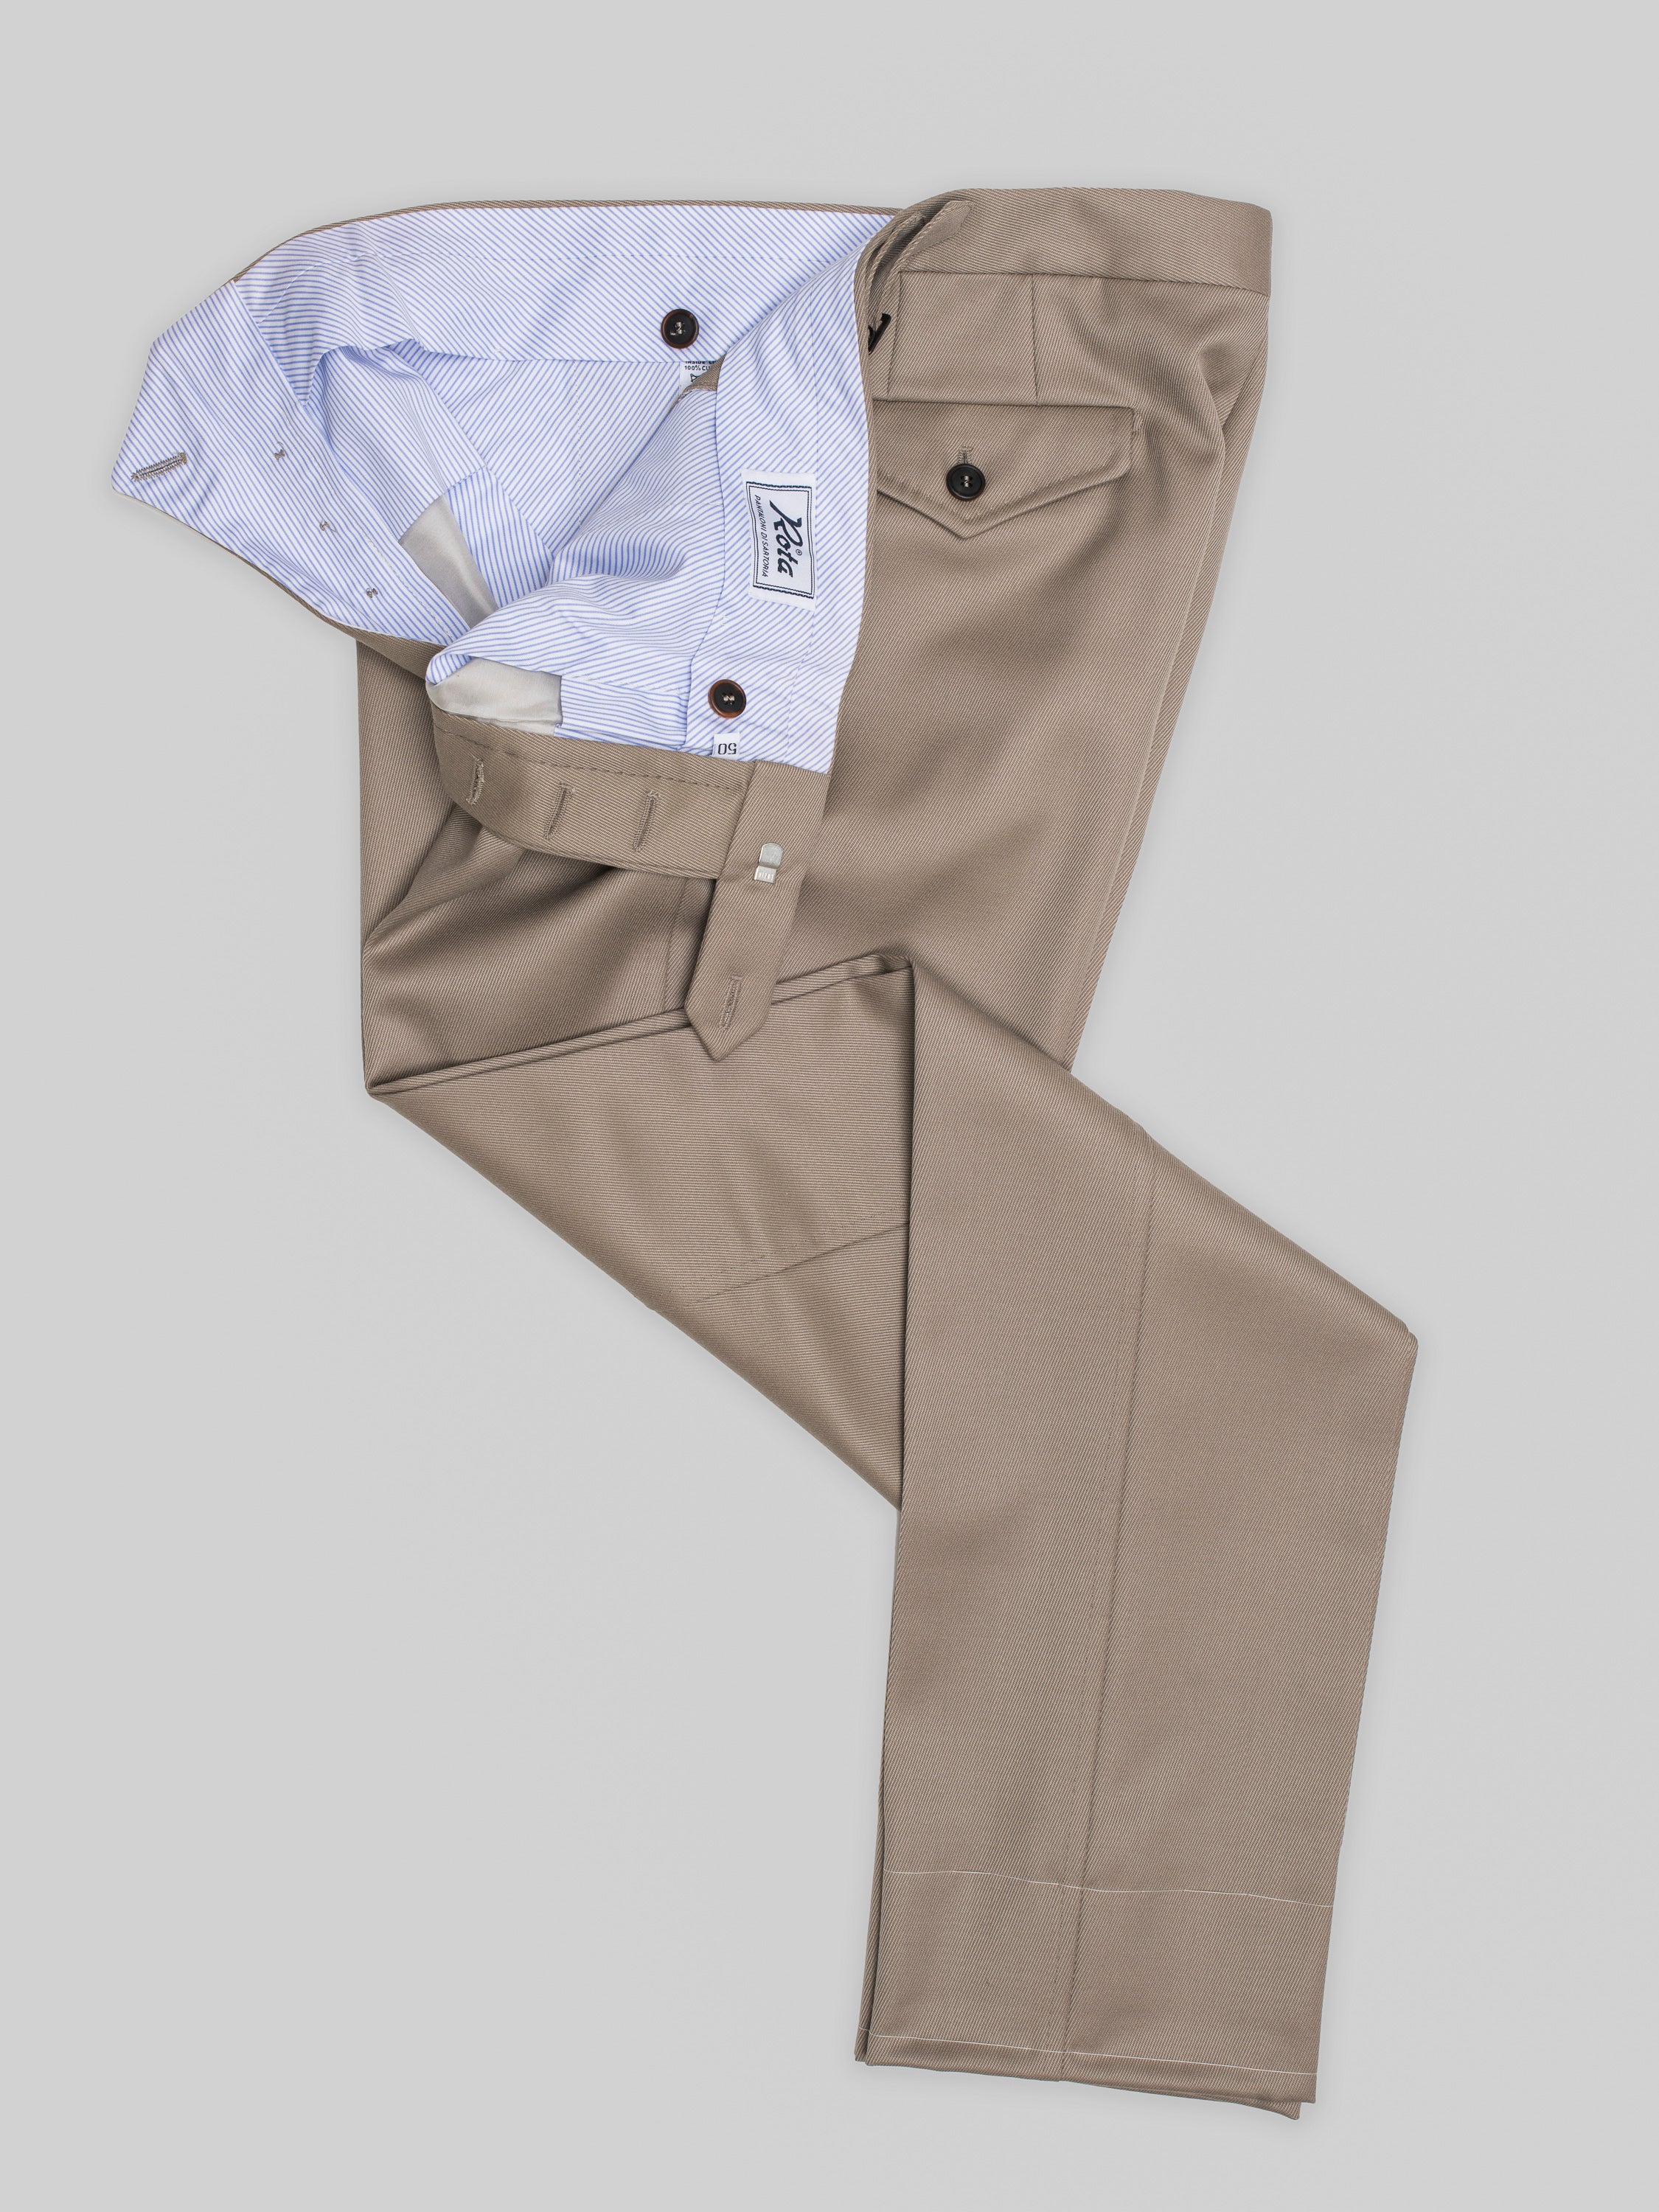 Mens Expandaband Twill Trousers in pure polyester. Sizes 34-44”.